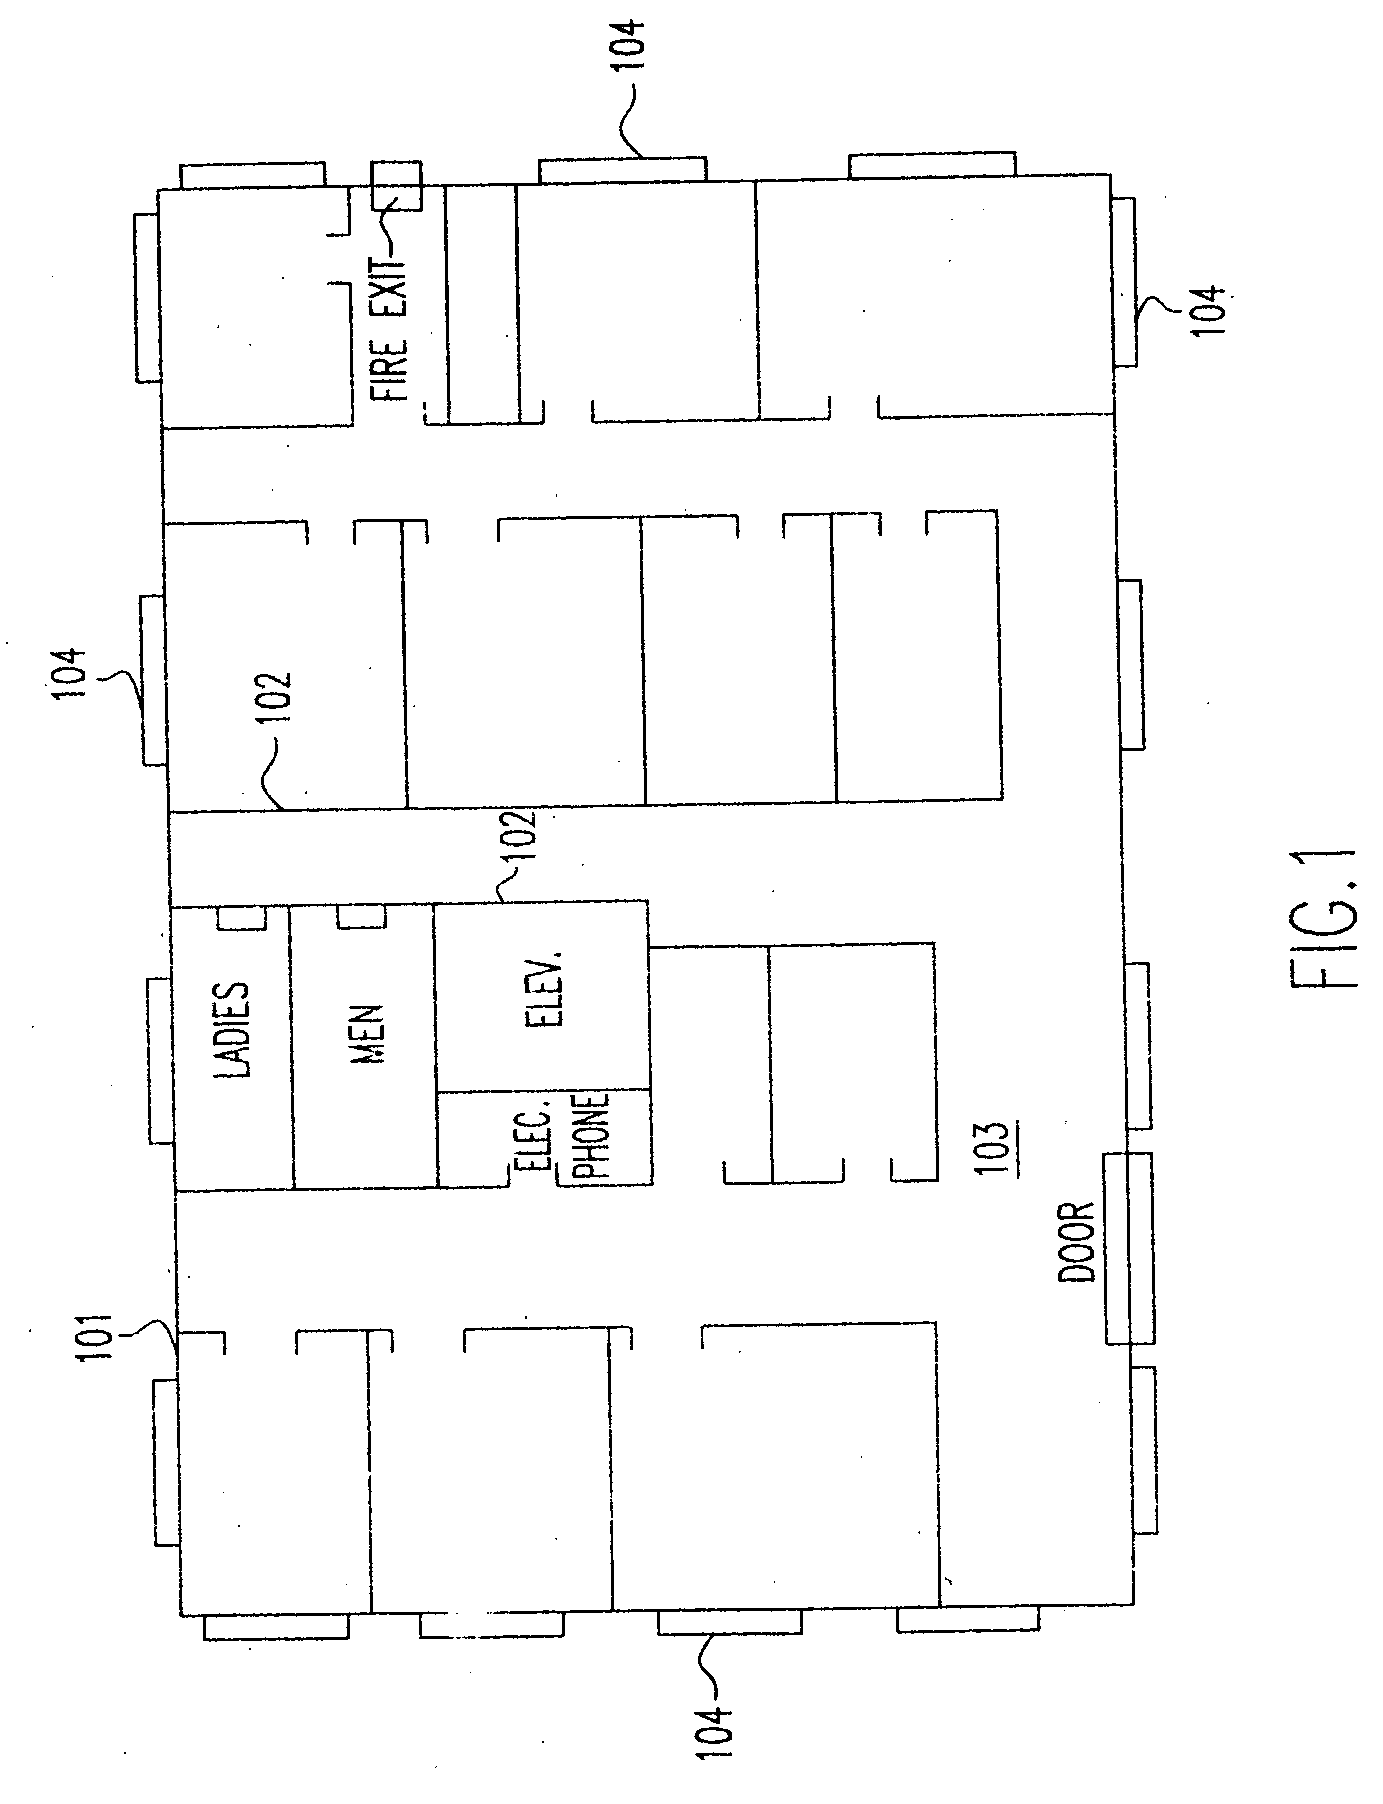 Method and system, with component kits for designing or deploying a communications network which considers frequency dependent effects